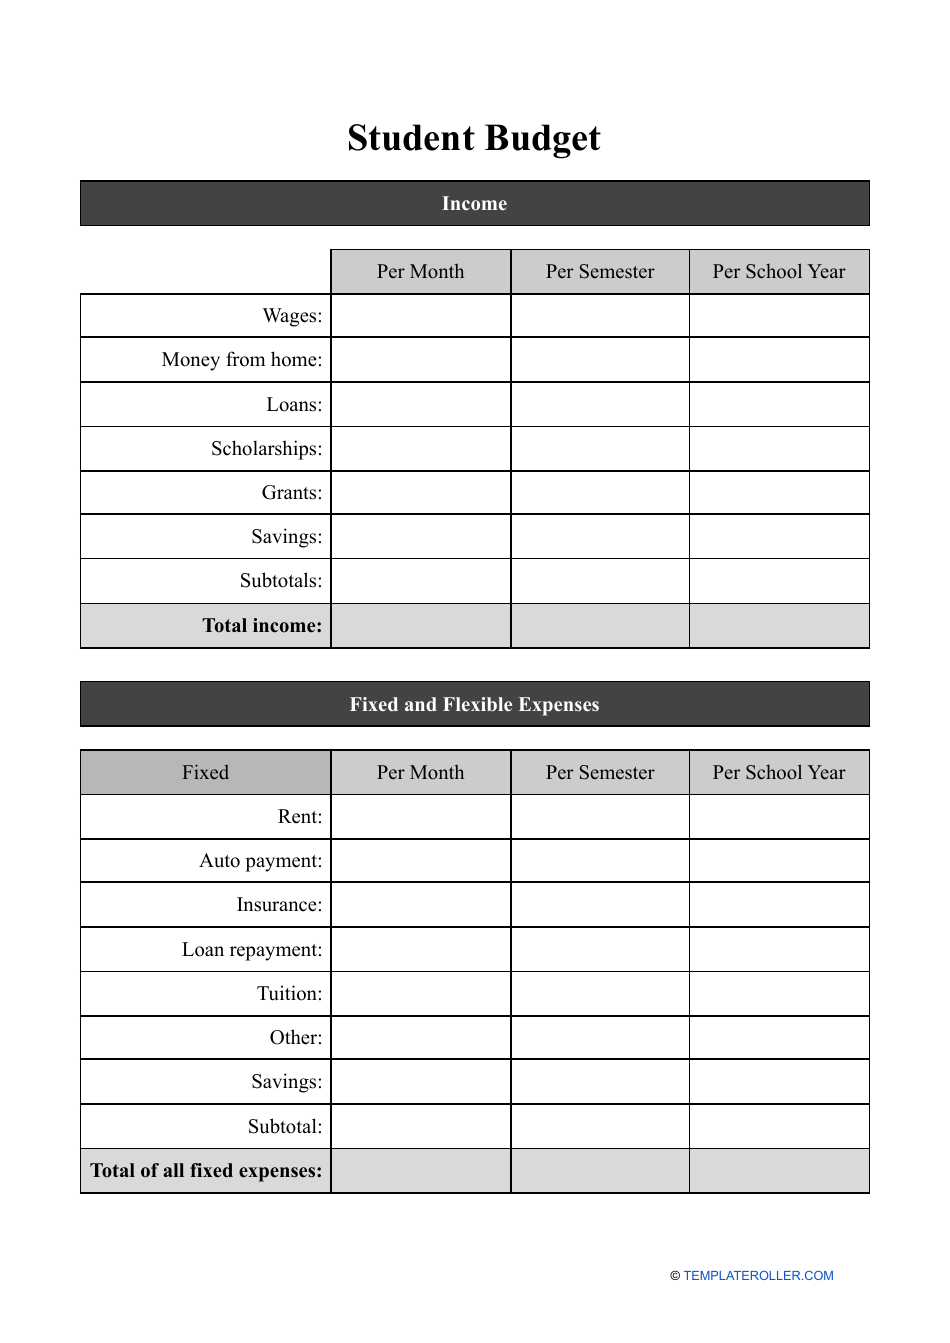 Student Budget Template - Manage Your Finances Effectively